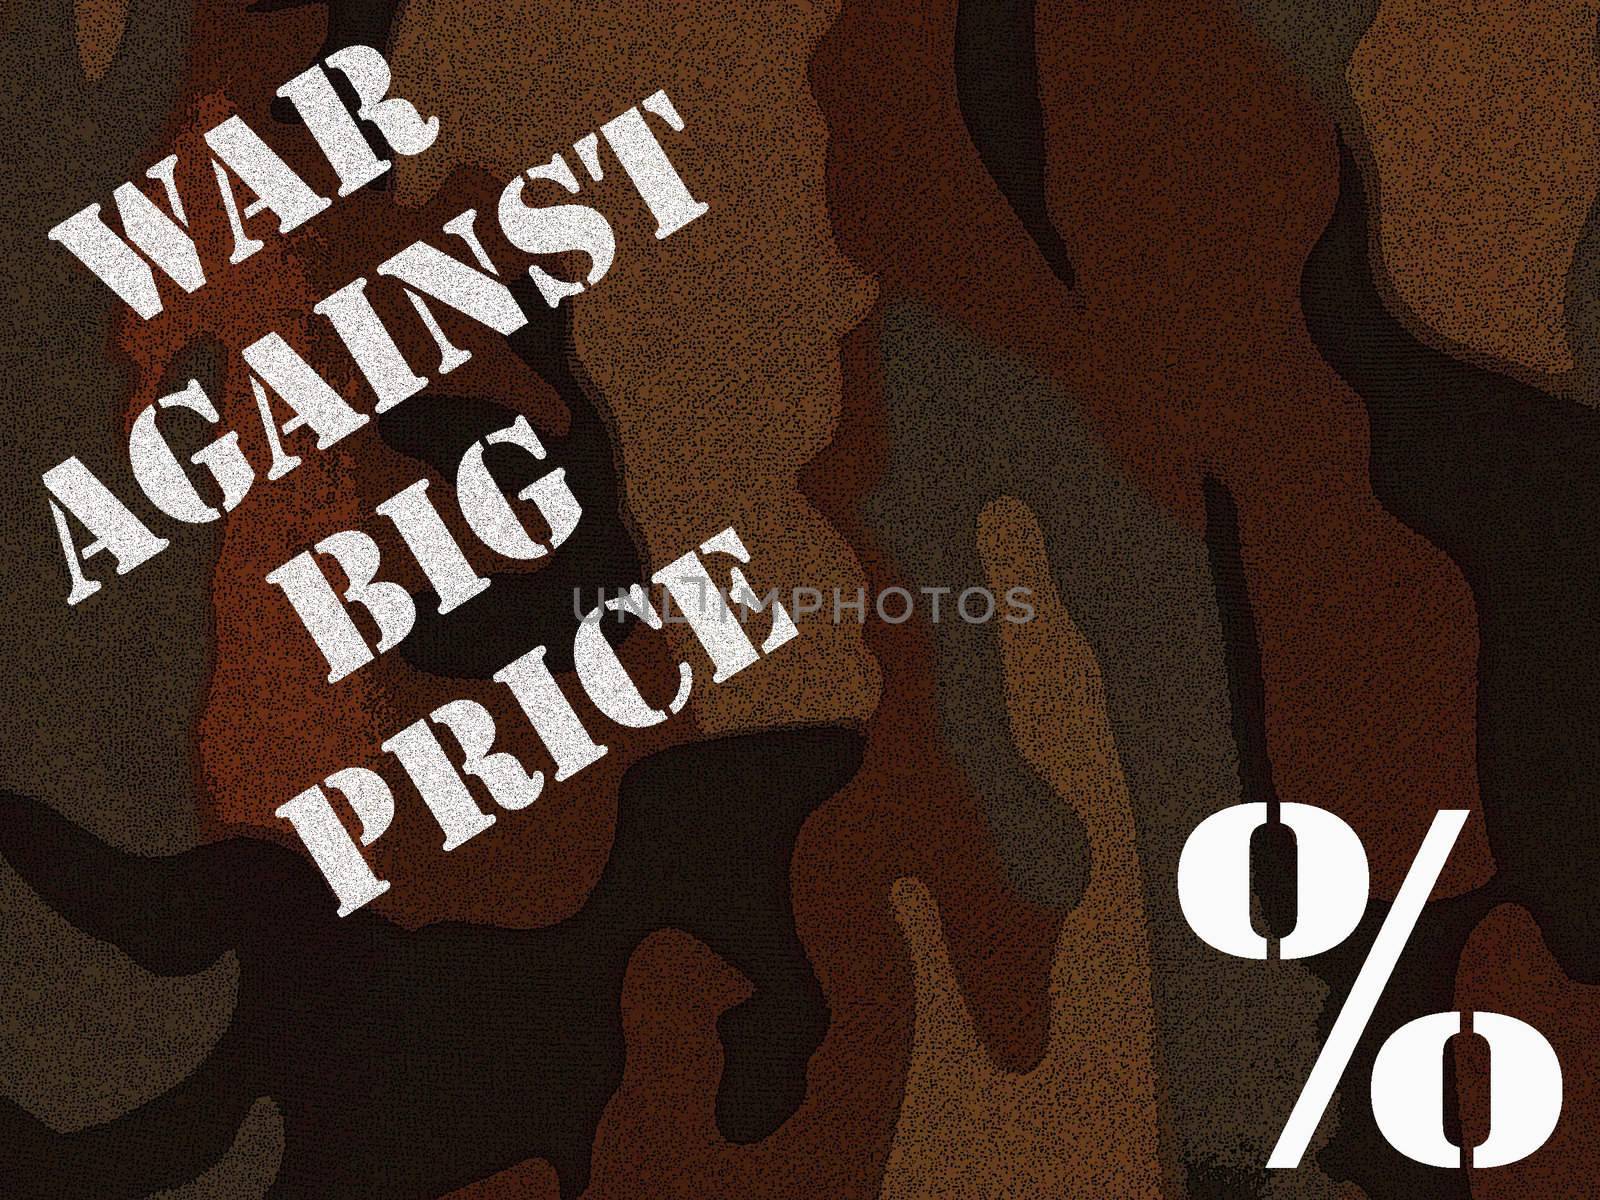 WAR AGAINST BIG PRICE POSTER by Spartacus